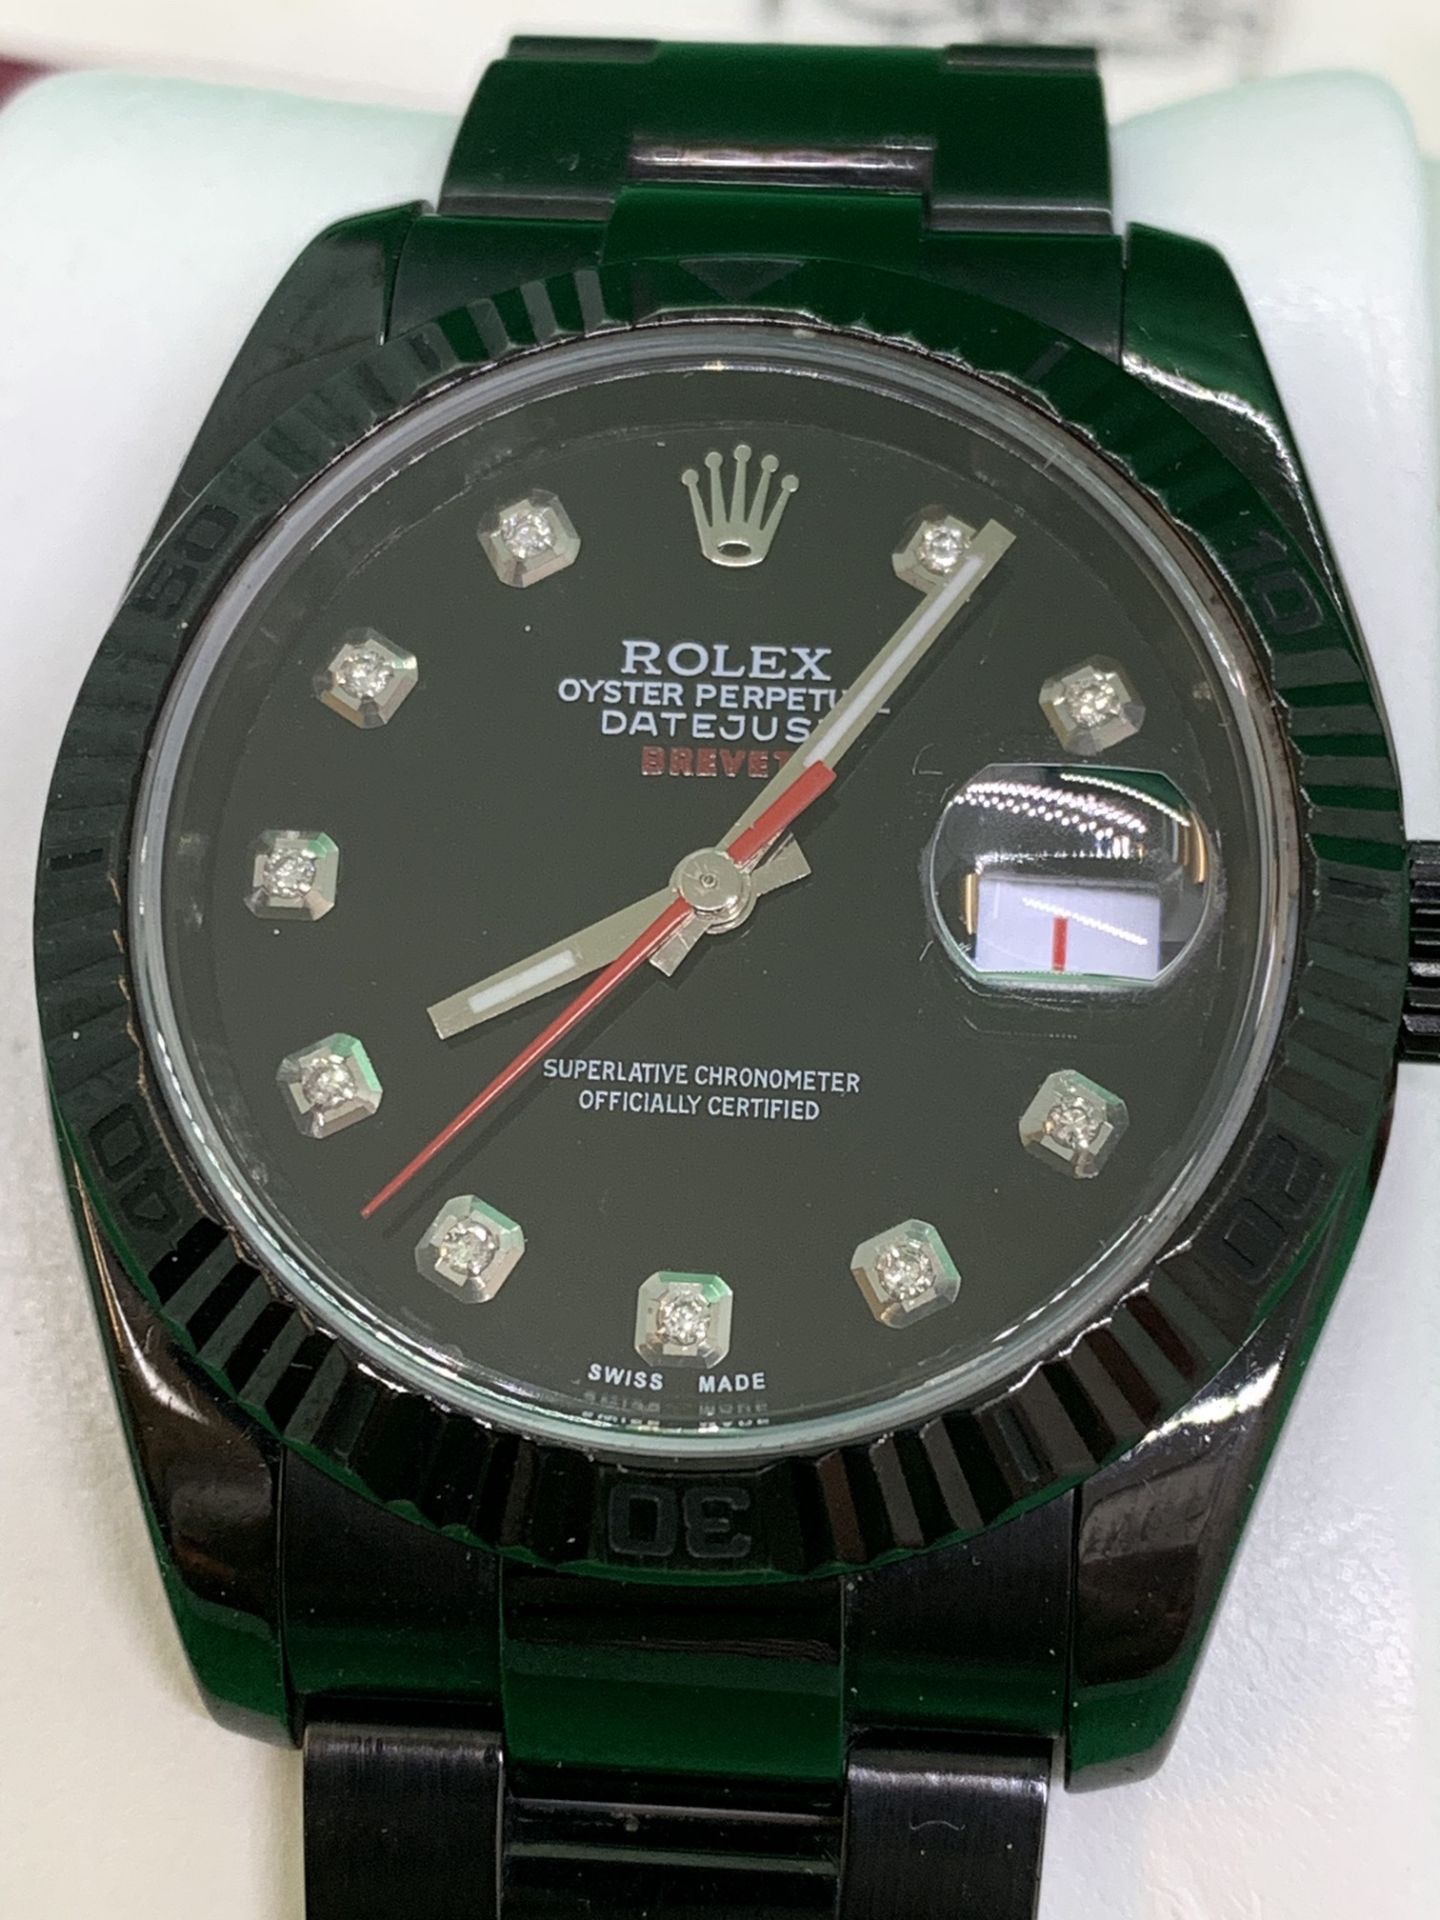 Rolex Oyster Perpetual Stainless Steel Watch with Gold Bezel - Customised Black - Image 3 of 8